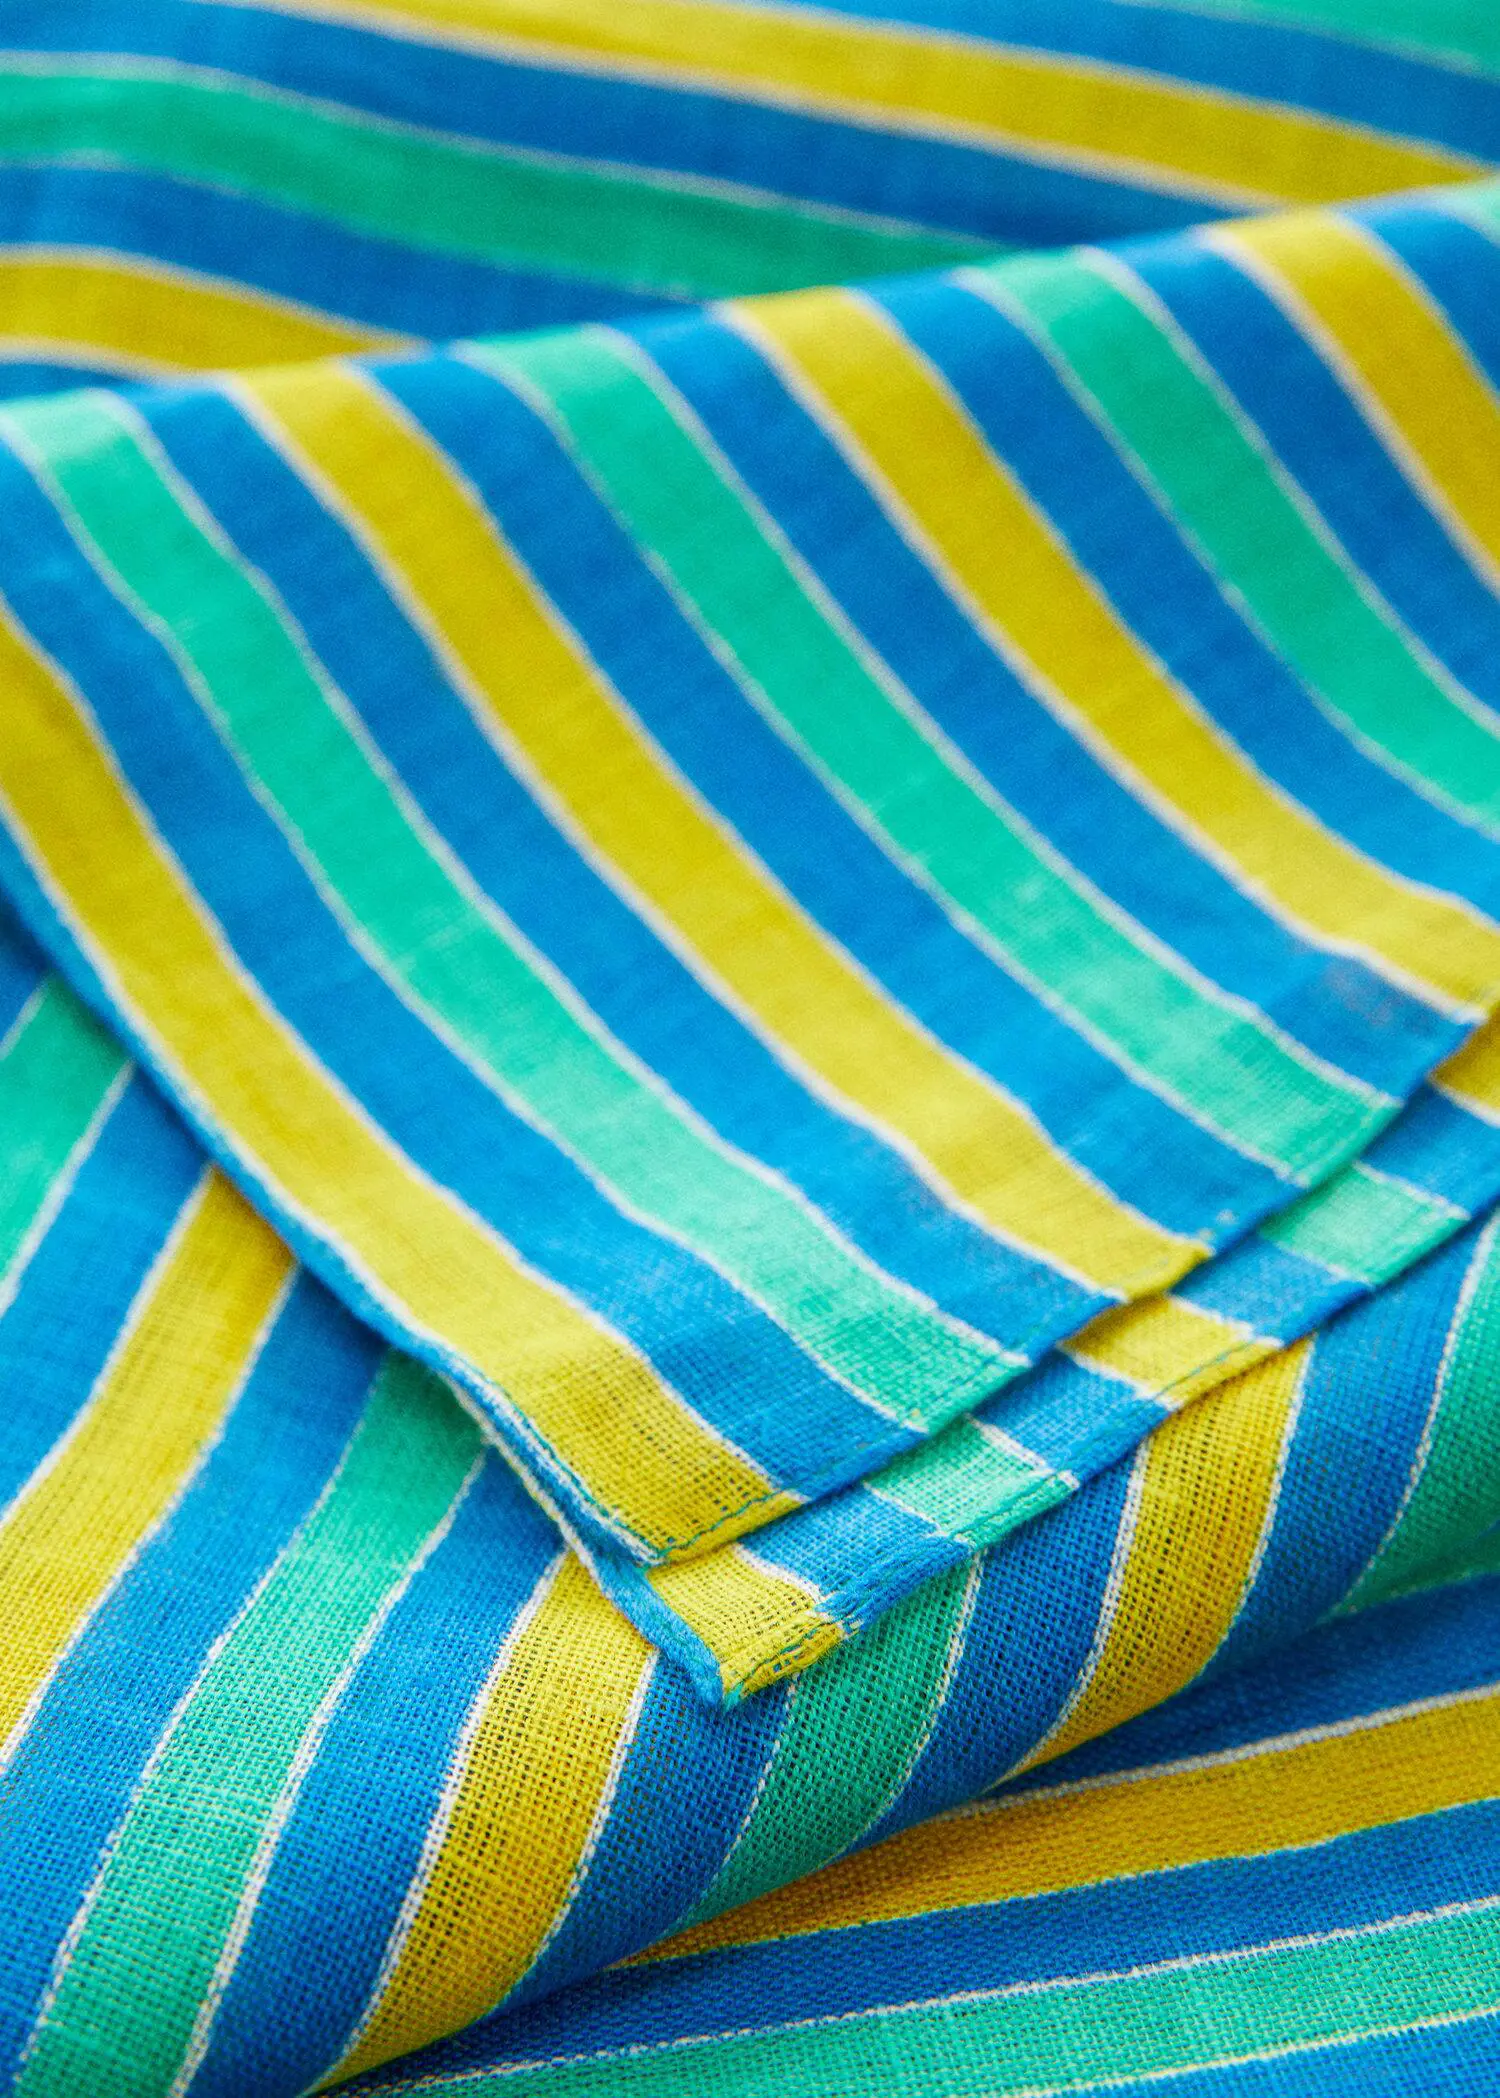 Mango Multi-coloured striped linen sarong. a close-up view of a blue, yellow, and green striped cloth. 